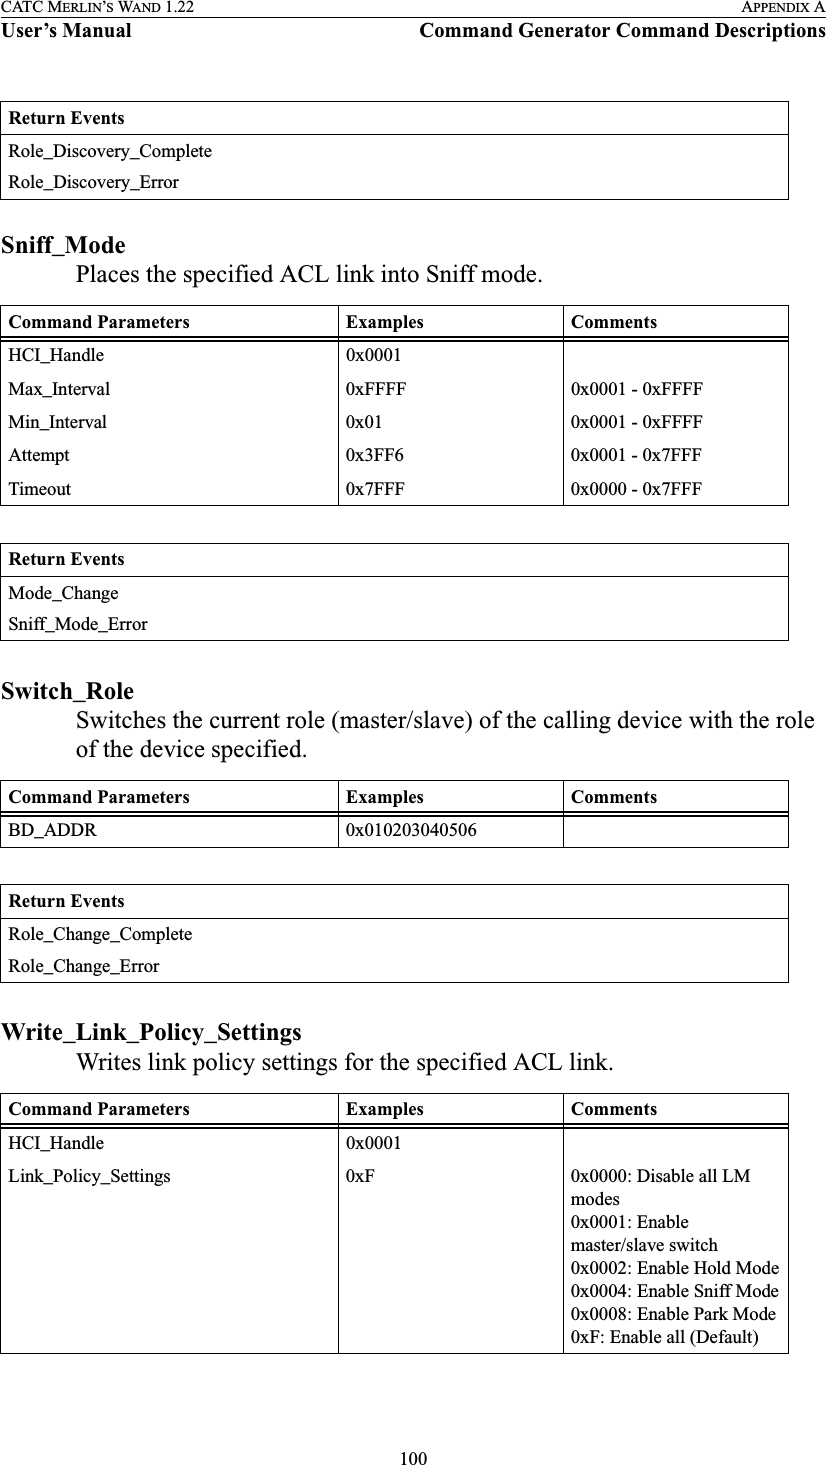 100CATC MERLIN’S WAND 1.22 APPENDIX AUser’s Manual Command Generator Command DescriptionsSniff_ModePlaces the specified ACL link into Sniff mode.Switch_RoleSwitches the current role (master/slave) of the calling device with the role of the device specified.Write_Link_Policy_SettingsWrites link policy settings for the specified ACL link.Return EventsRole_Discovery_CompleteRole_Discovery_ErrorCommand Parameters Examples CommentsHCI_Handle 0x0001Max_Interval 0xFFFF 0x0001 - 0xFFFFMin_Interval 0x01 0x0001 - 0xFFFFAttempt 0x3FF6 0x0001 - 0x7FFFTimeout 0x7FFF 0x0000 - 0x7FFFReturn EventsMode_ChangeSniff_Mode_ErrorCommand Parameters Examples CommentsBD_ADDR 0x010203040506Return EventsRole_Change_CompleteRole_Change_ErrorCommand Parameters Examples CommentsHCI_Handle 0x0001Link_Policy_Settings 0xF 0x0000: Disable all LM modes0x0001: Enable master/slave switch0x0002: Enable Hold Mode0x0004: Enable Sniff Mode0x0008: Enable Park Mode0xF: Enable all (Default)